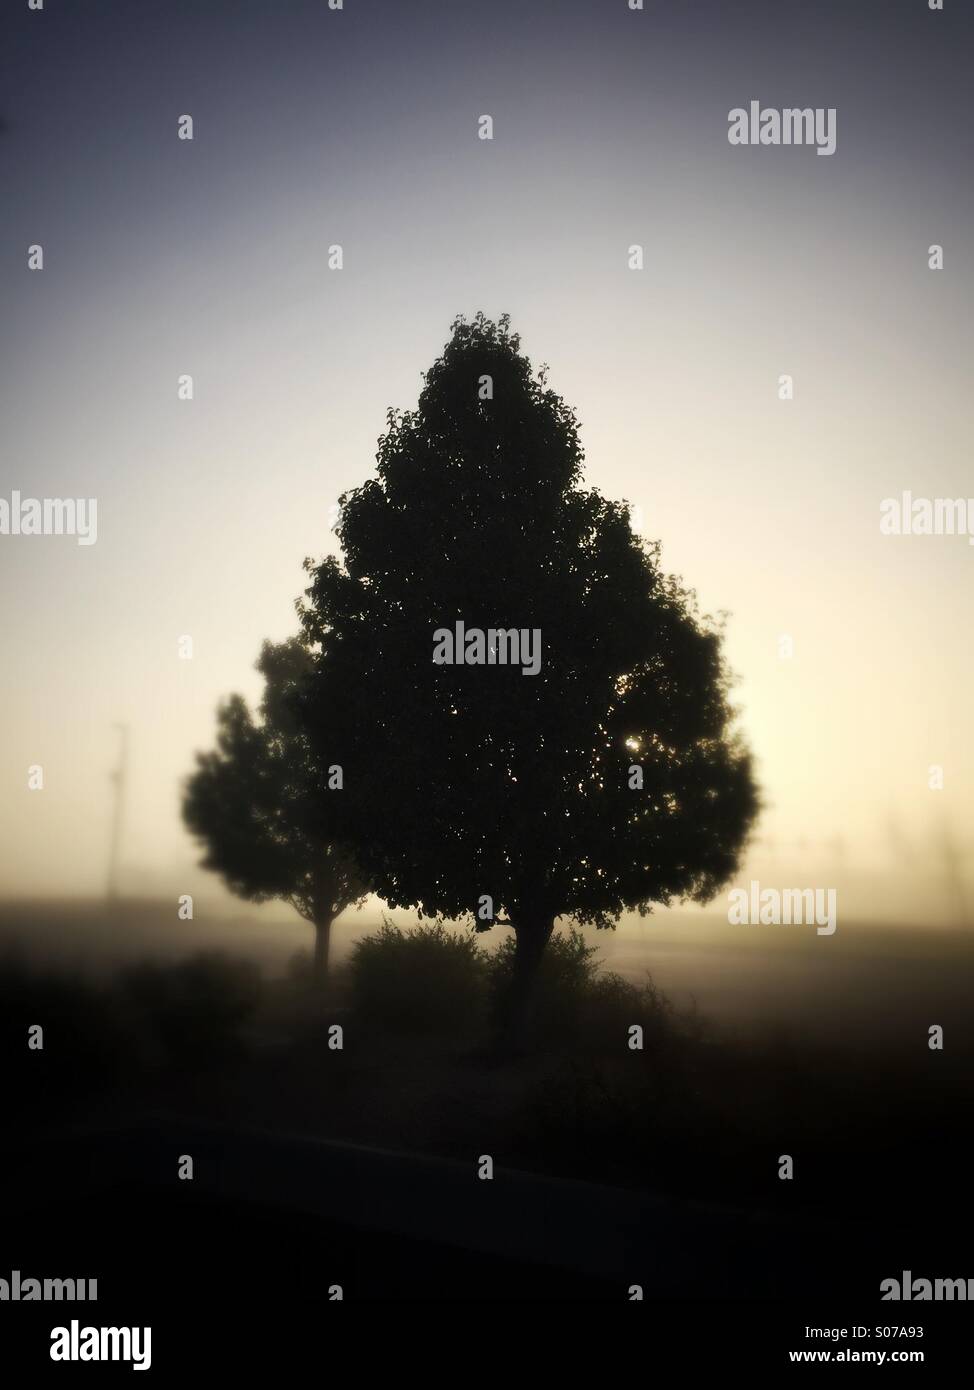 Silhouette of a tree on a foggy morning Stock Photo